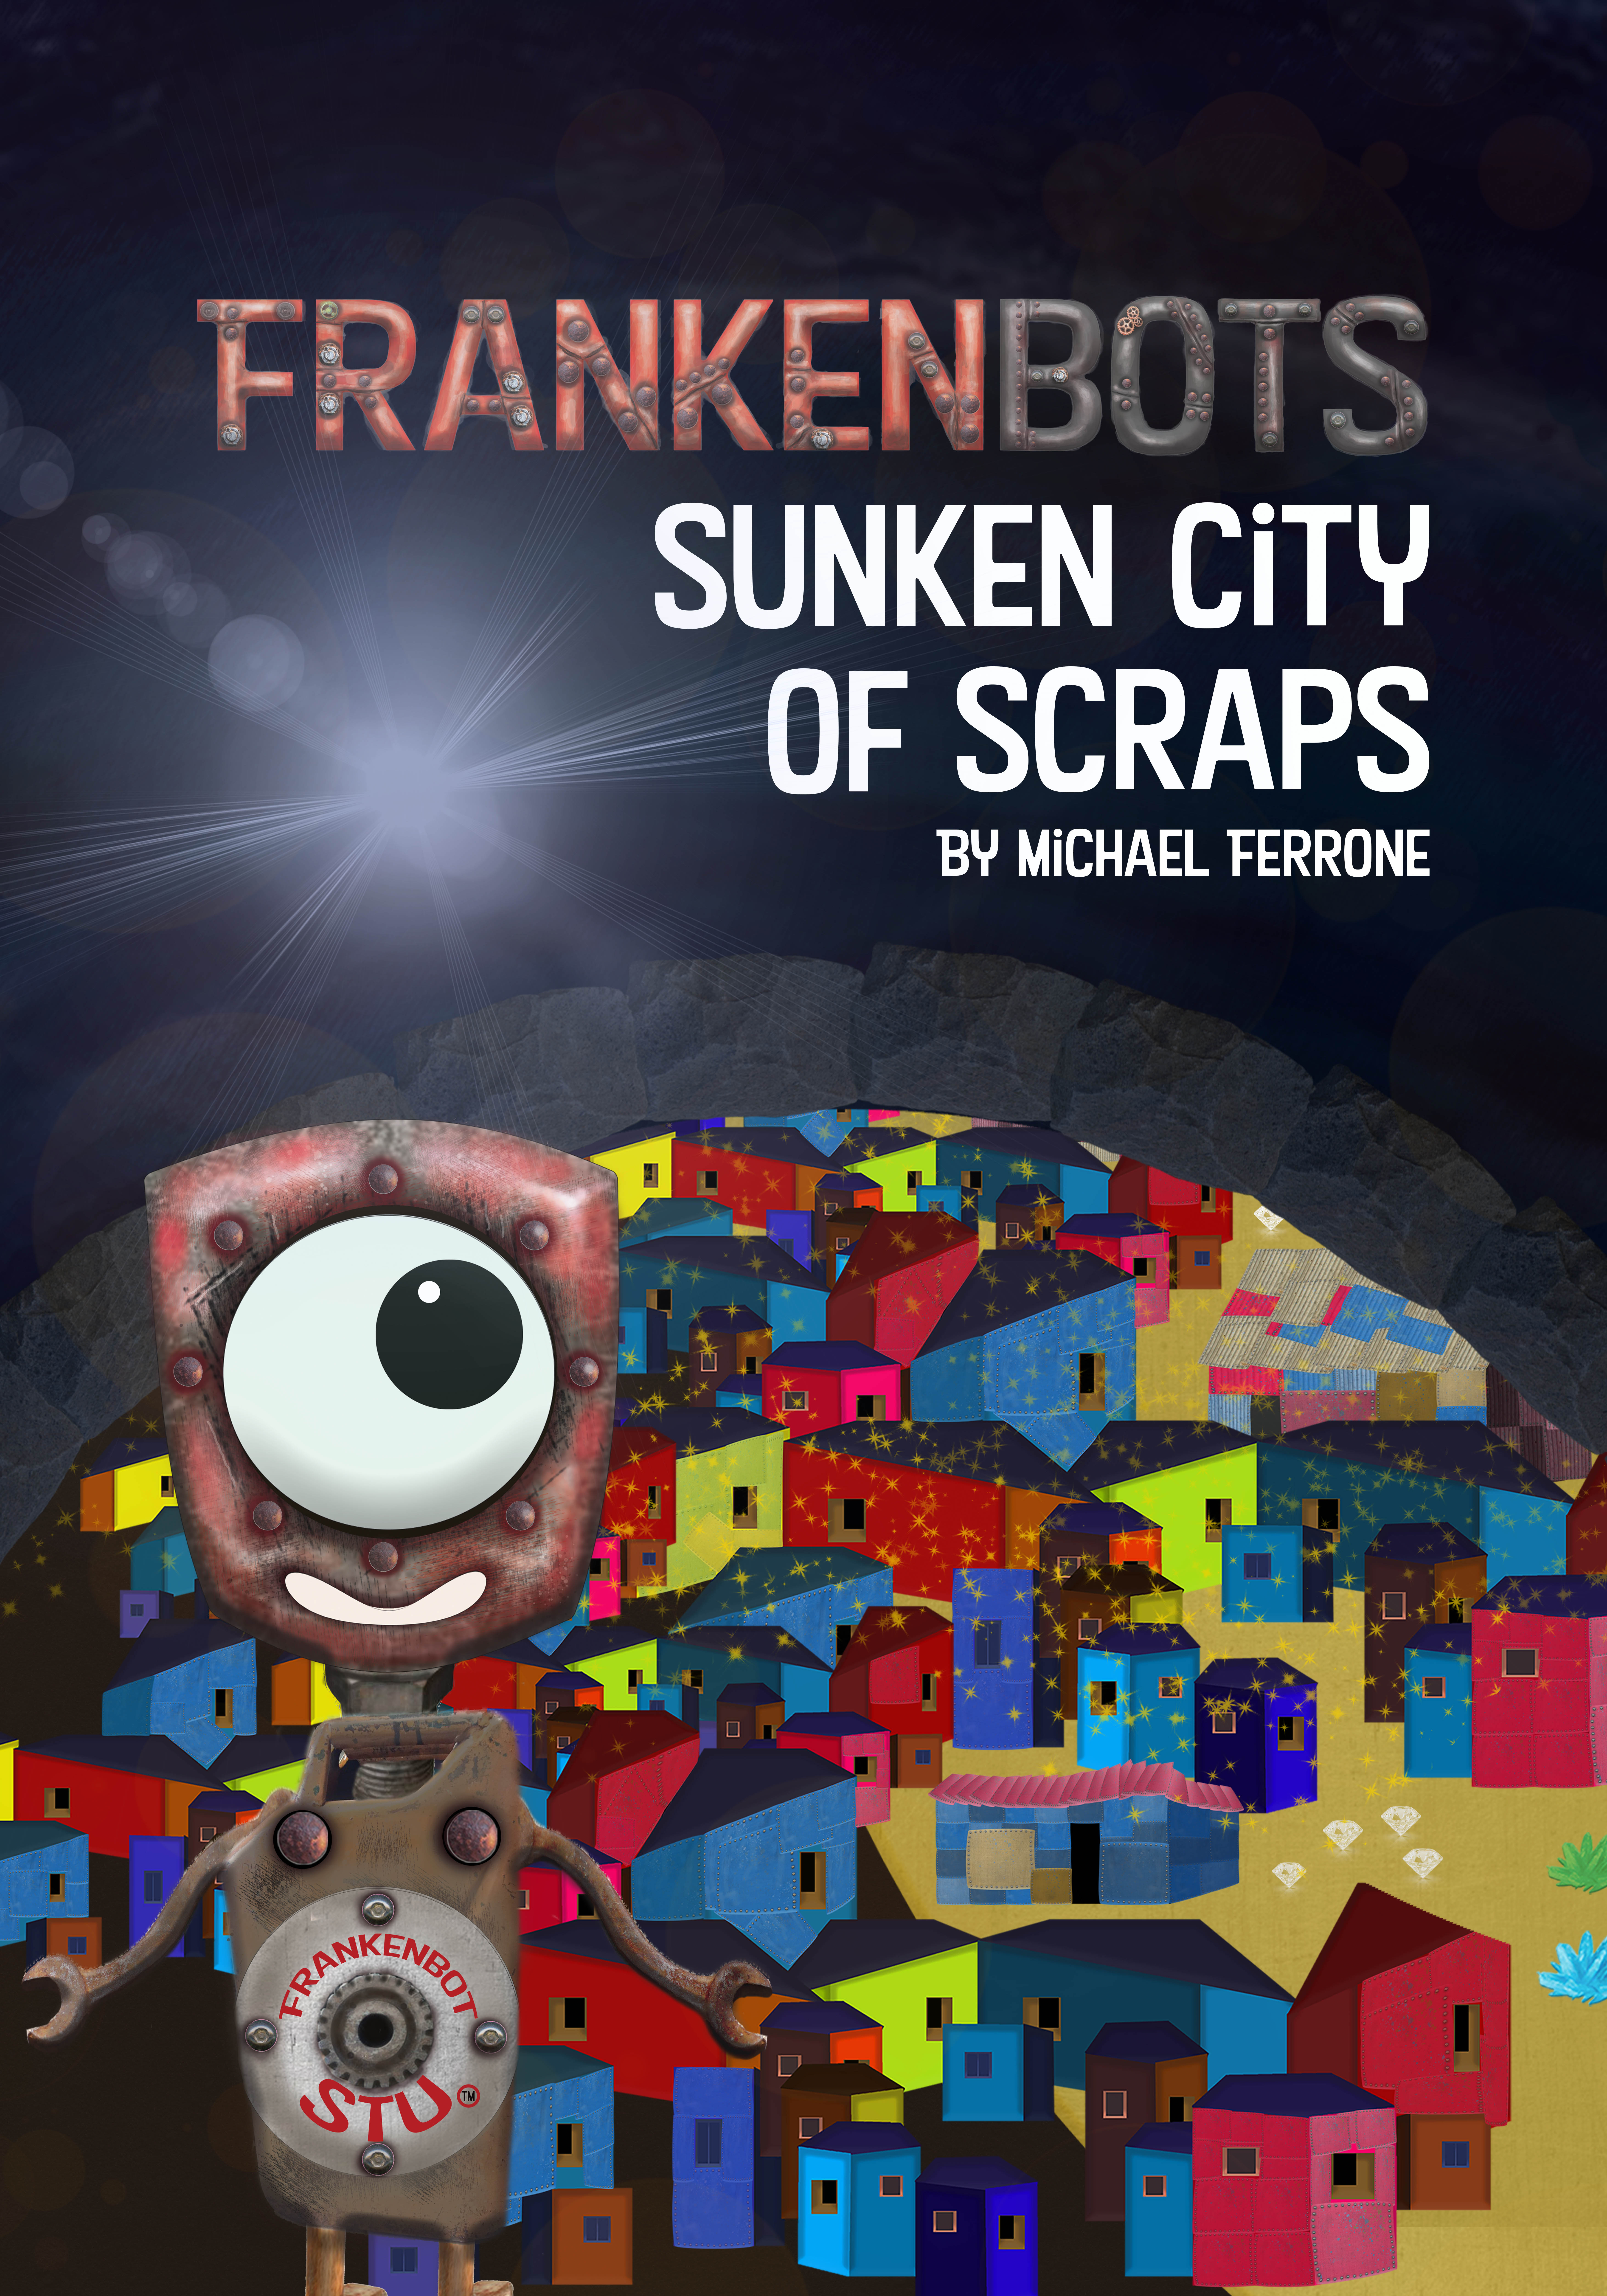 Frankenbots Creates Captivating Stories for Children with Inventive and "Riveting" Illustrations